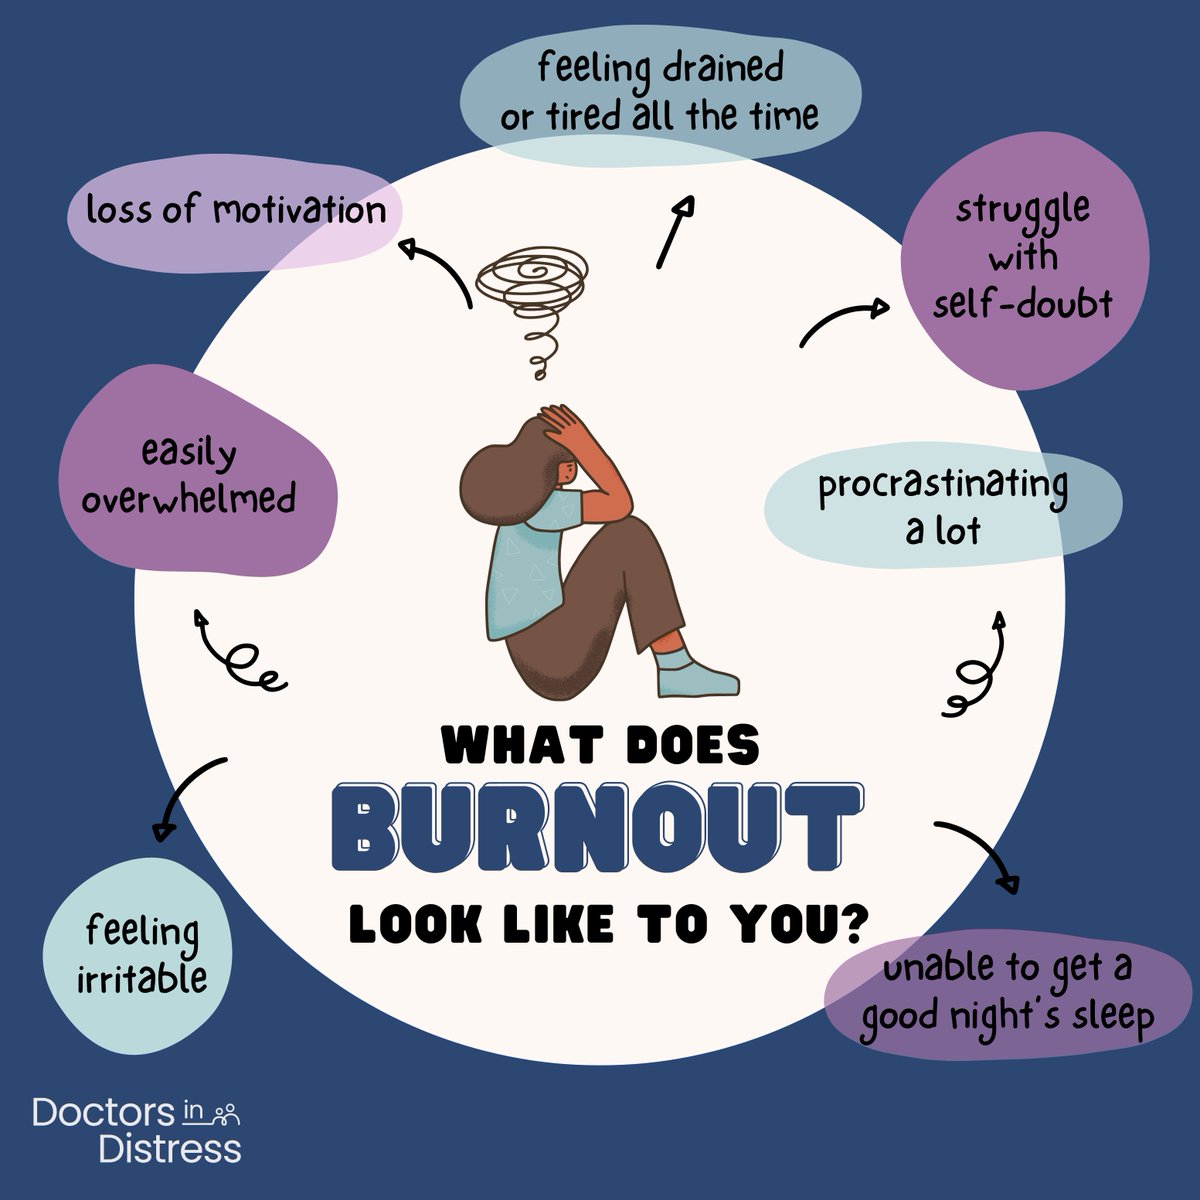 Did you know that almost a third of healthcare staff feel burnt out because of their work? Among the signs for burn out are feeling tired or drained all the time, difficulty sleeping, overwhelmed, or feeling isolated. Ambulance staff and nurses are the top two professions in…